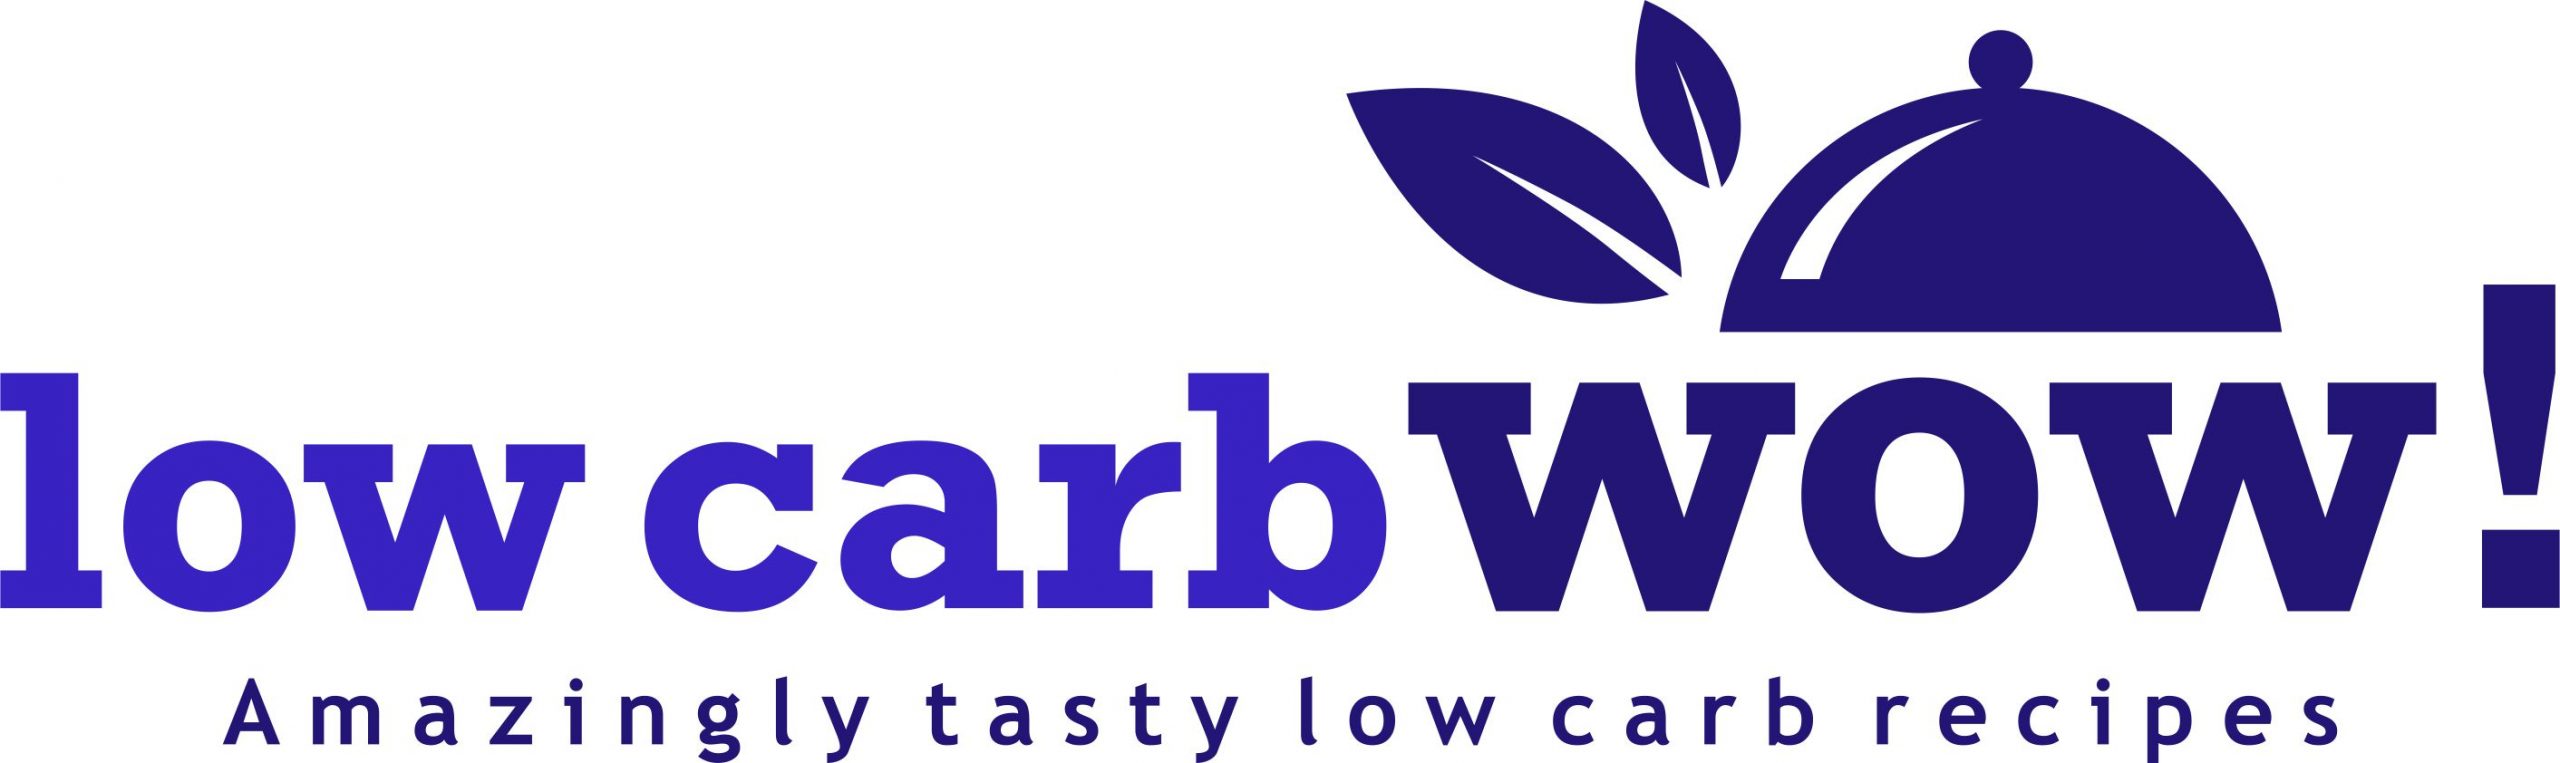 Low Carb WOW!